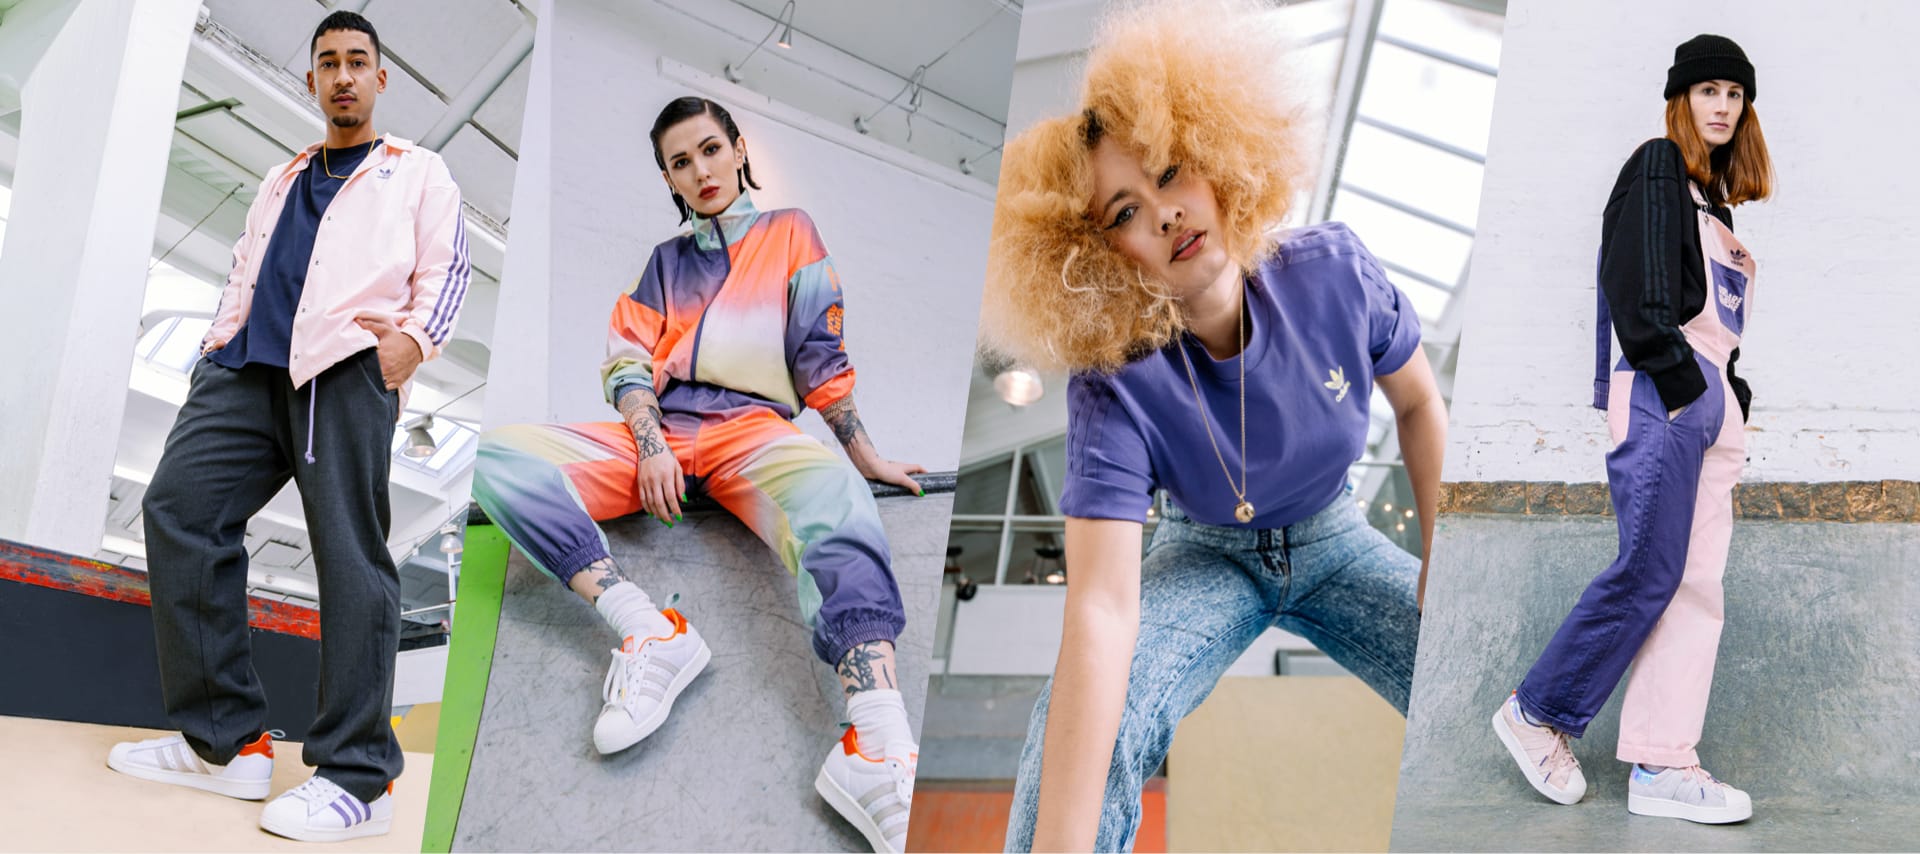 adidas superstar girls are awesome